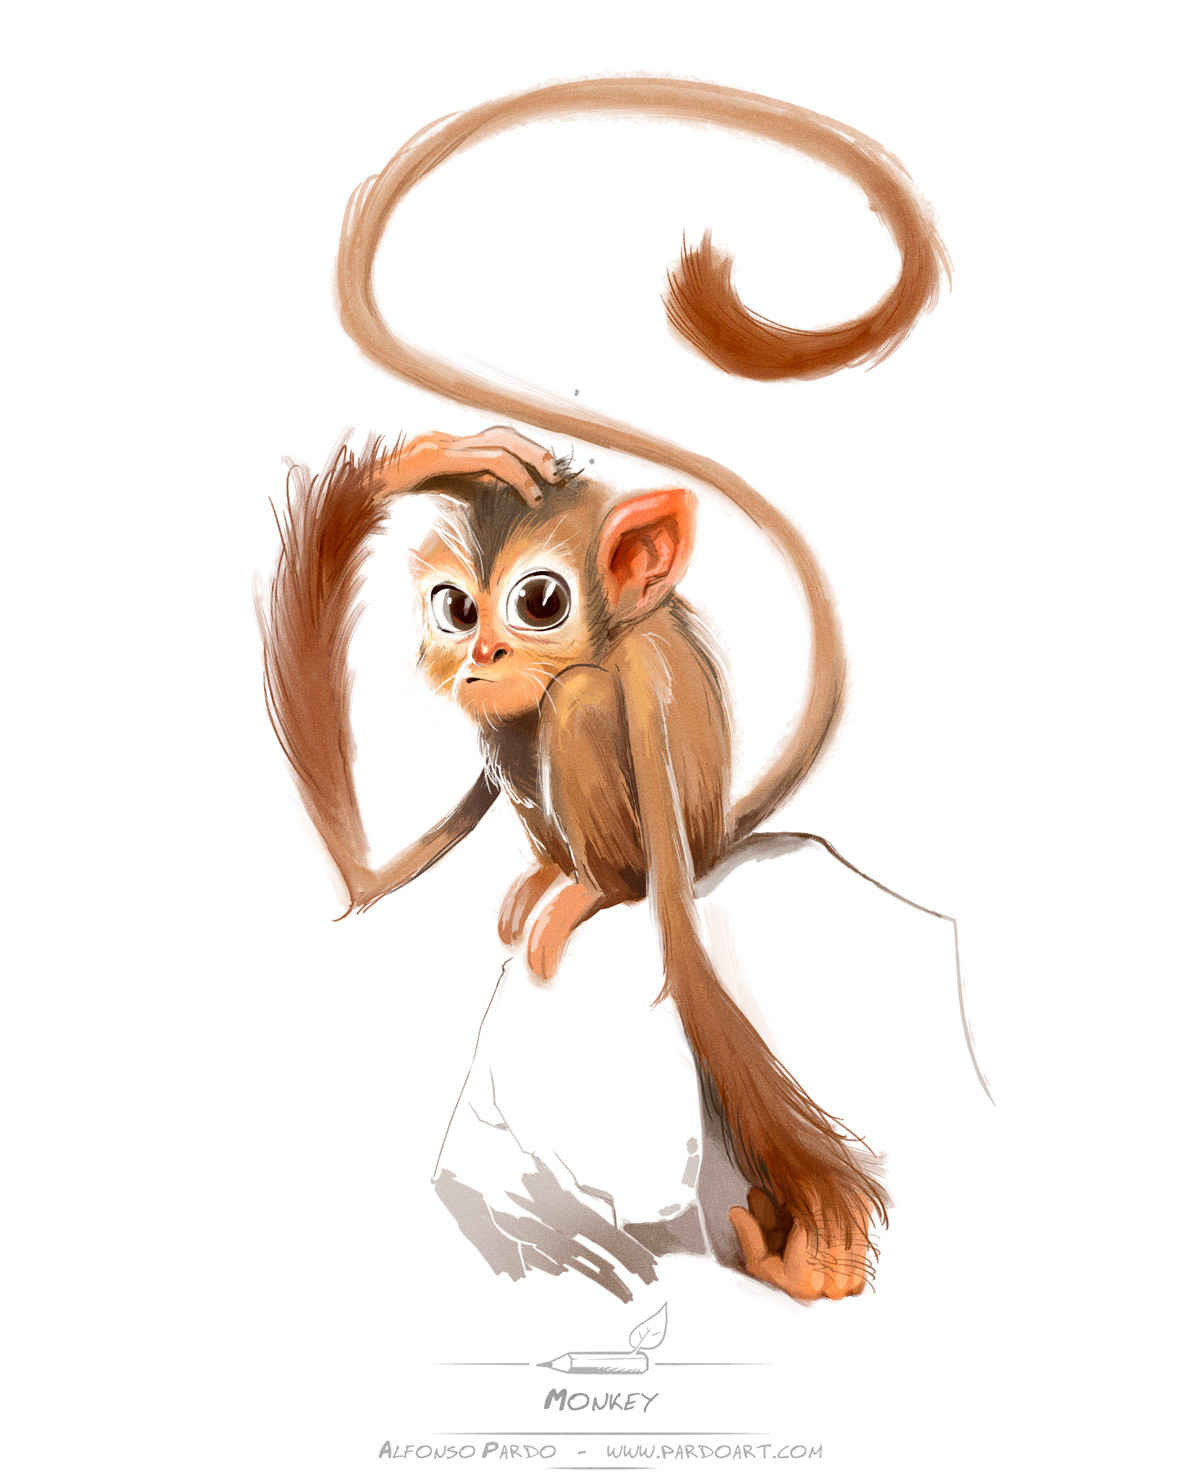 Monkey Sketch Images | Free Photos, PNG Stickers, Wallpapers & Backgrounds  - rawpixel